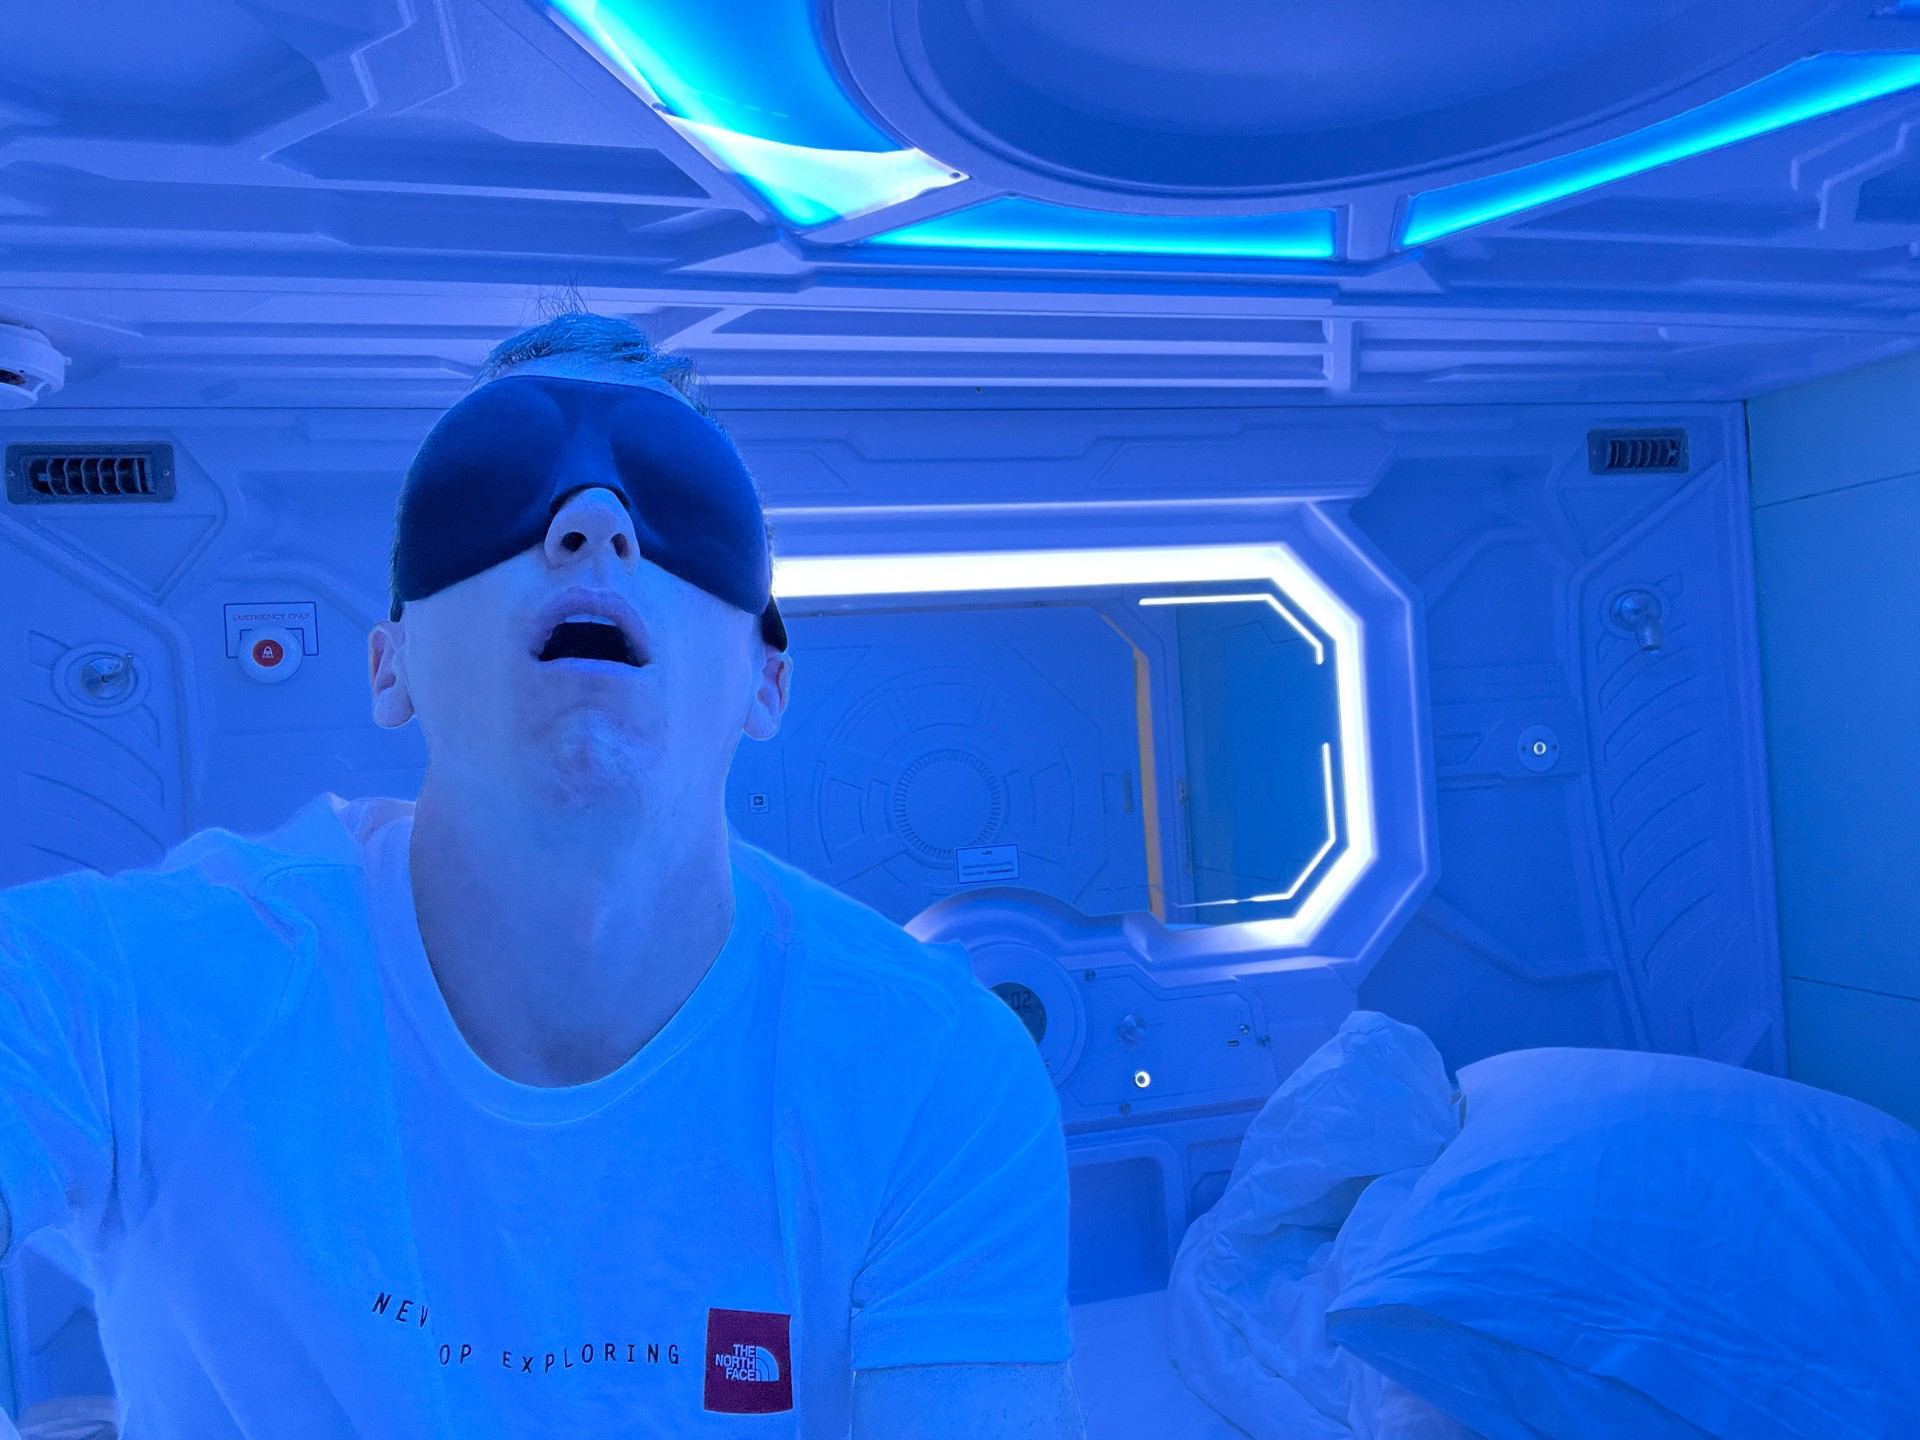 David Simpson inside the capsule at Capsule Hotel in Bangkok, Thailand. The day to end all days in Bangkok